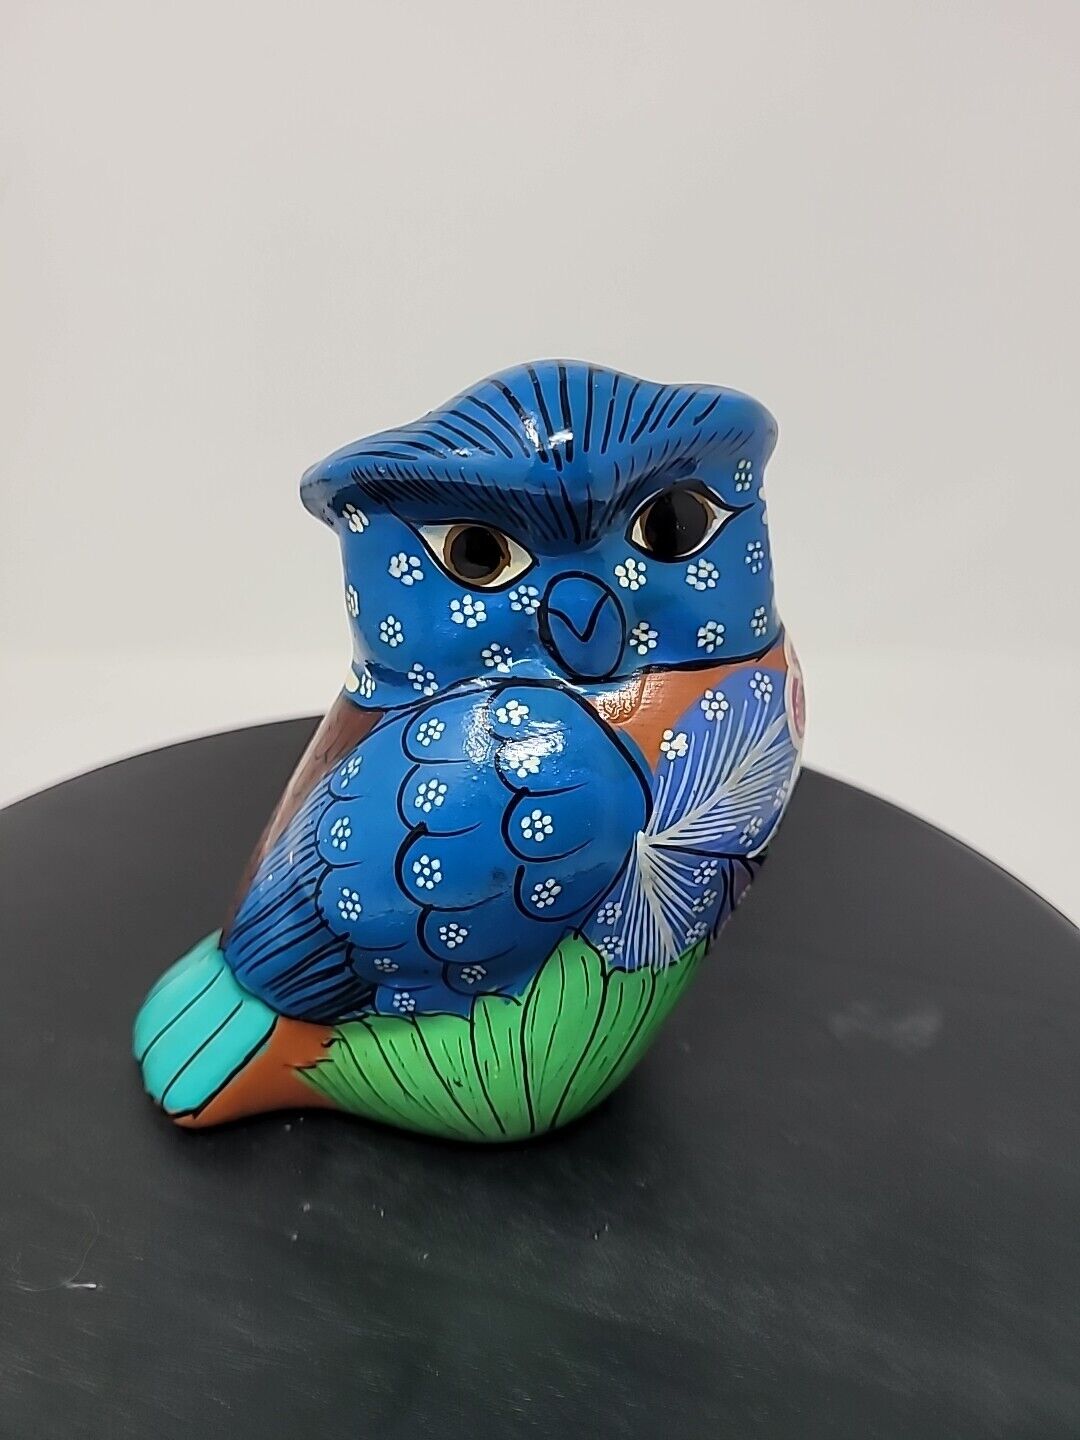 Mexican Folk Art Pottery Handpainted Mexican Love on Blue Ceramic Owl Figurine